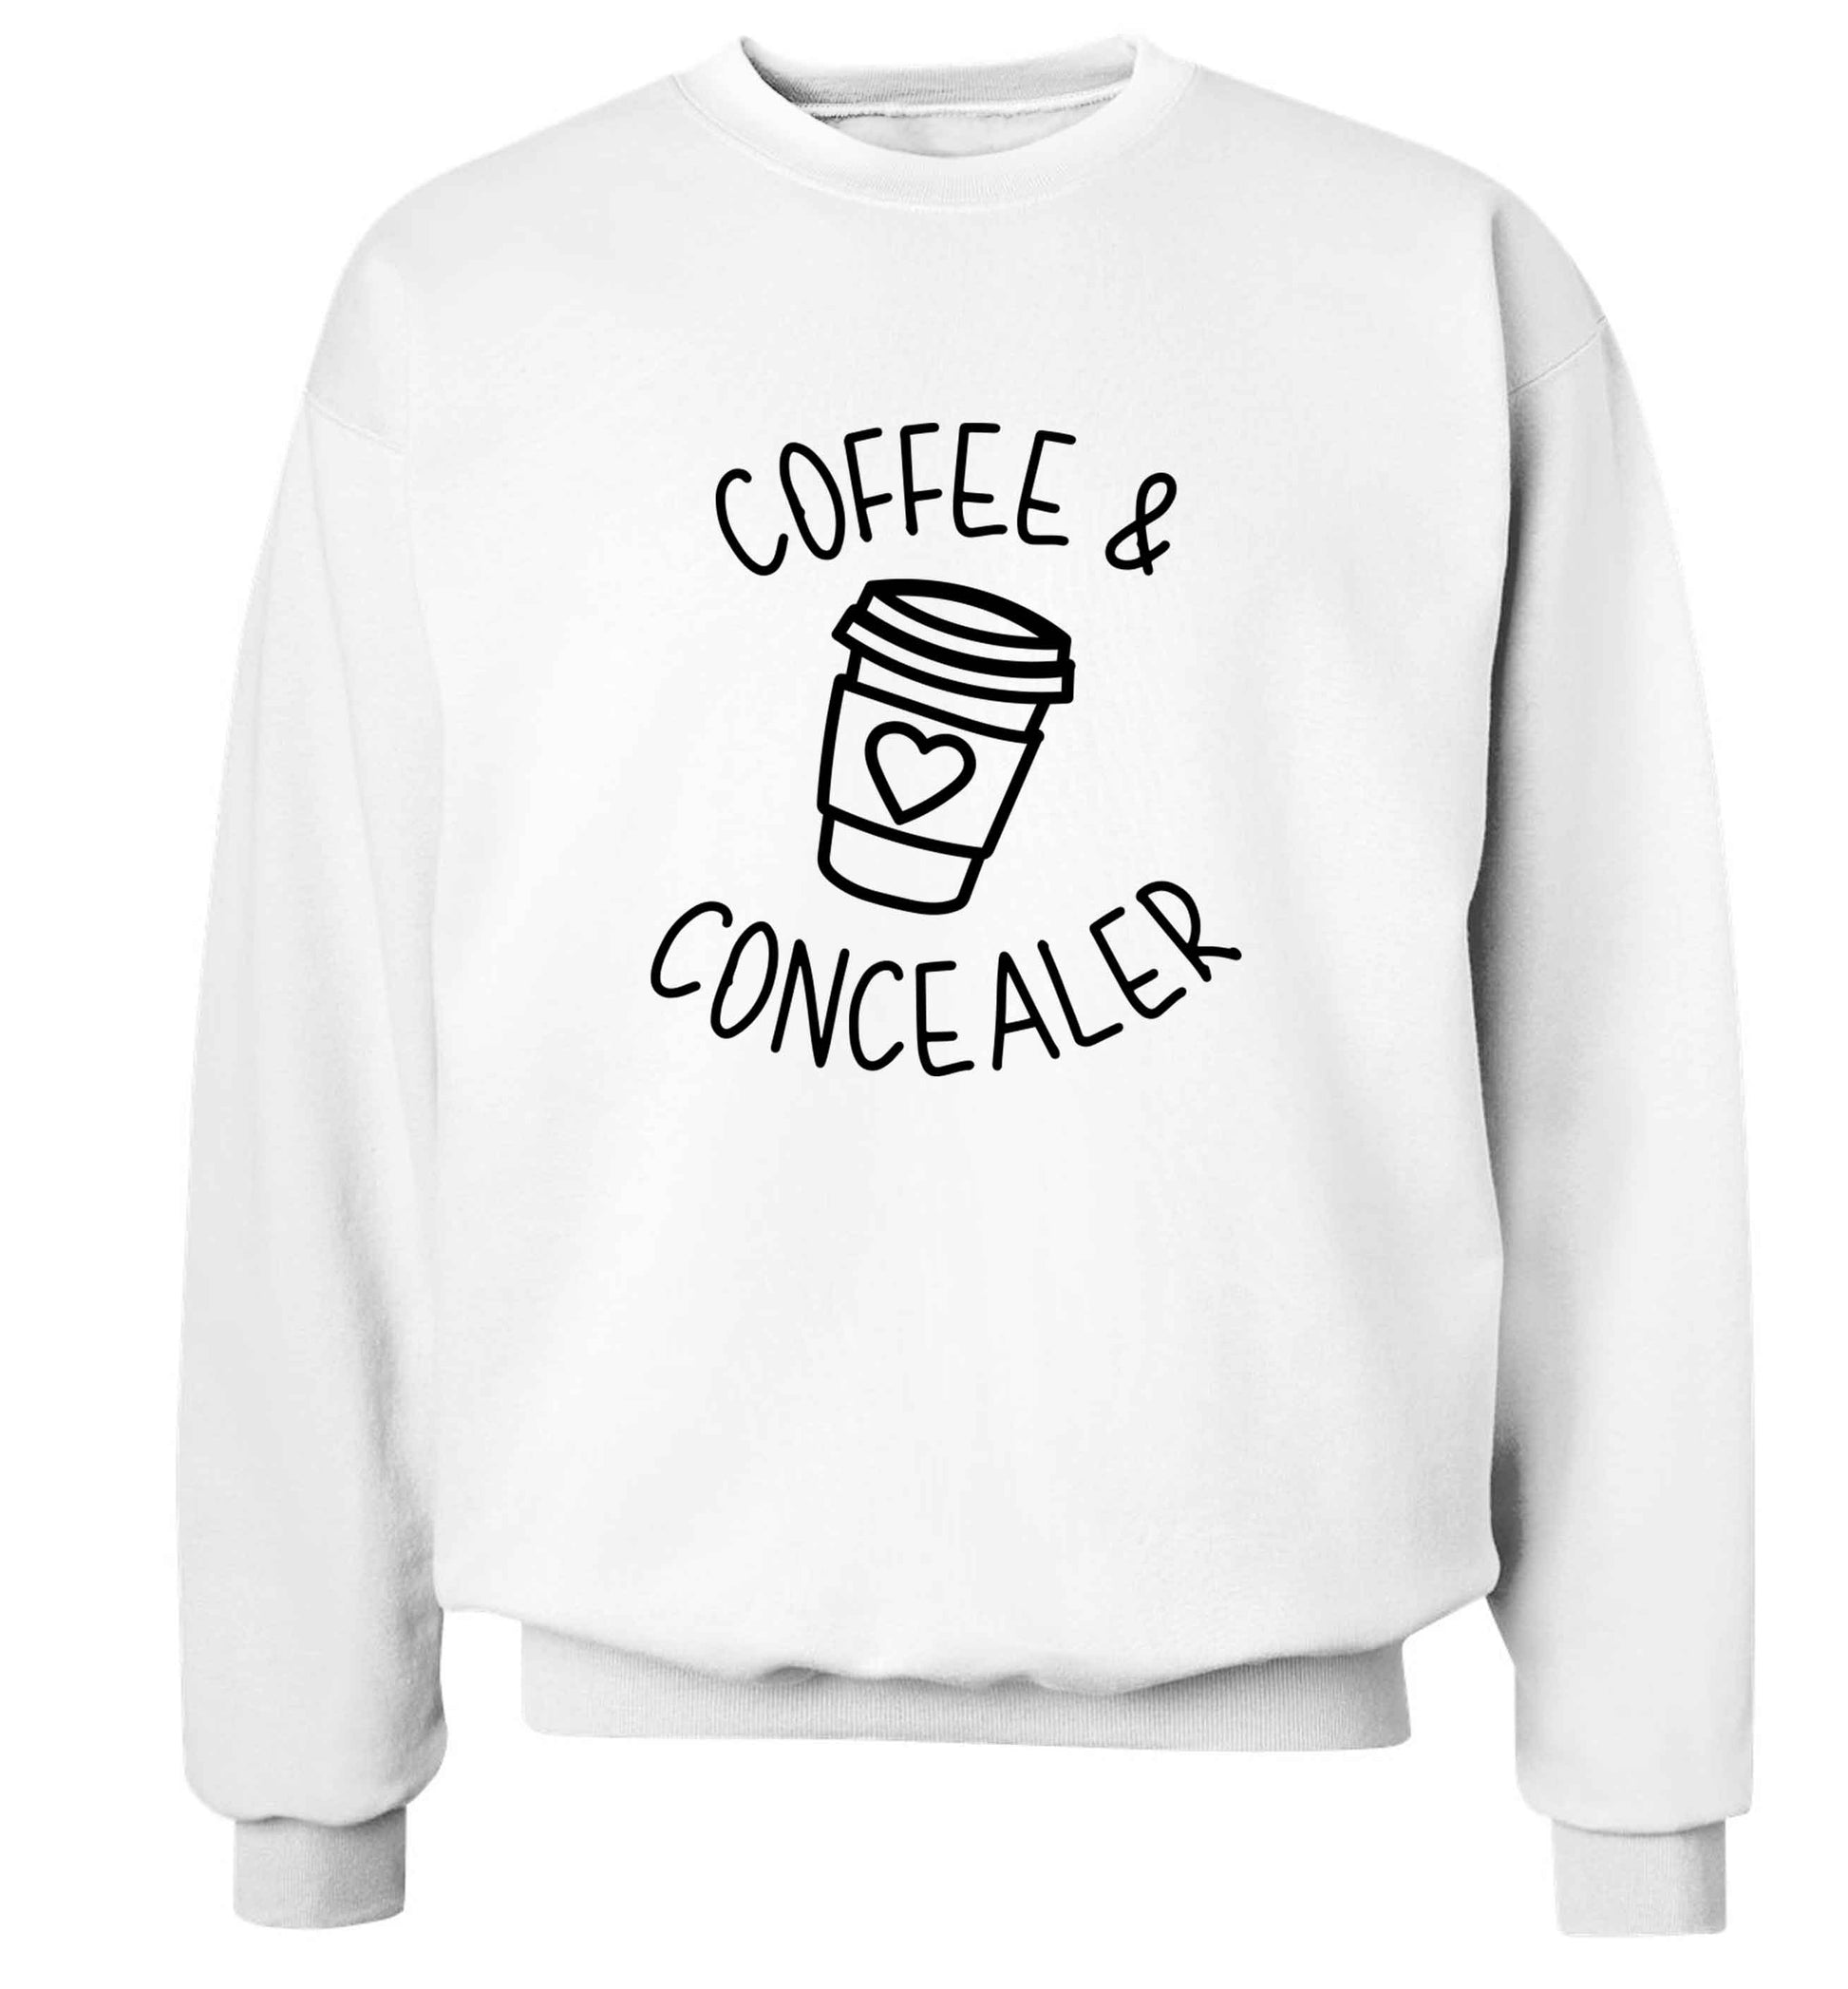 Coffee and concealer adult's unisex white sweater 2XL